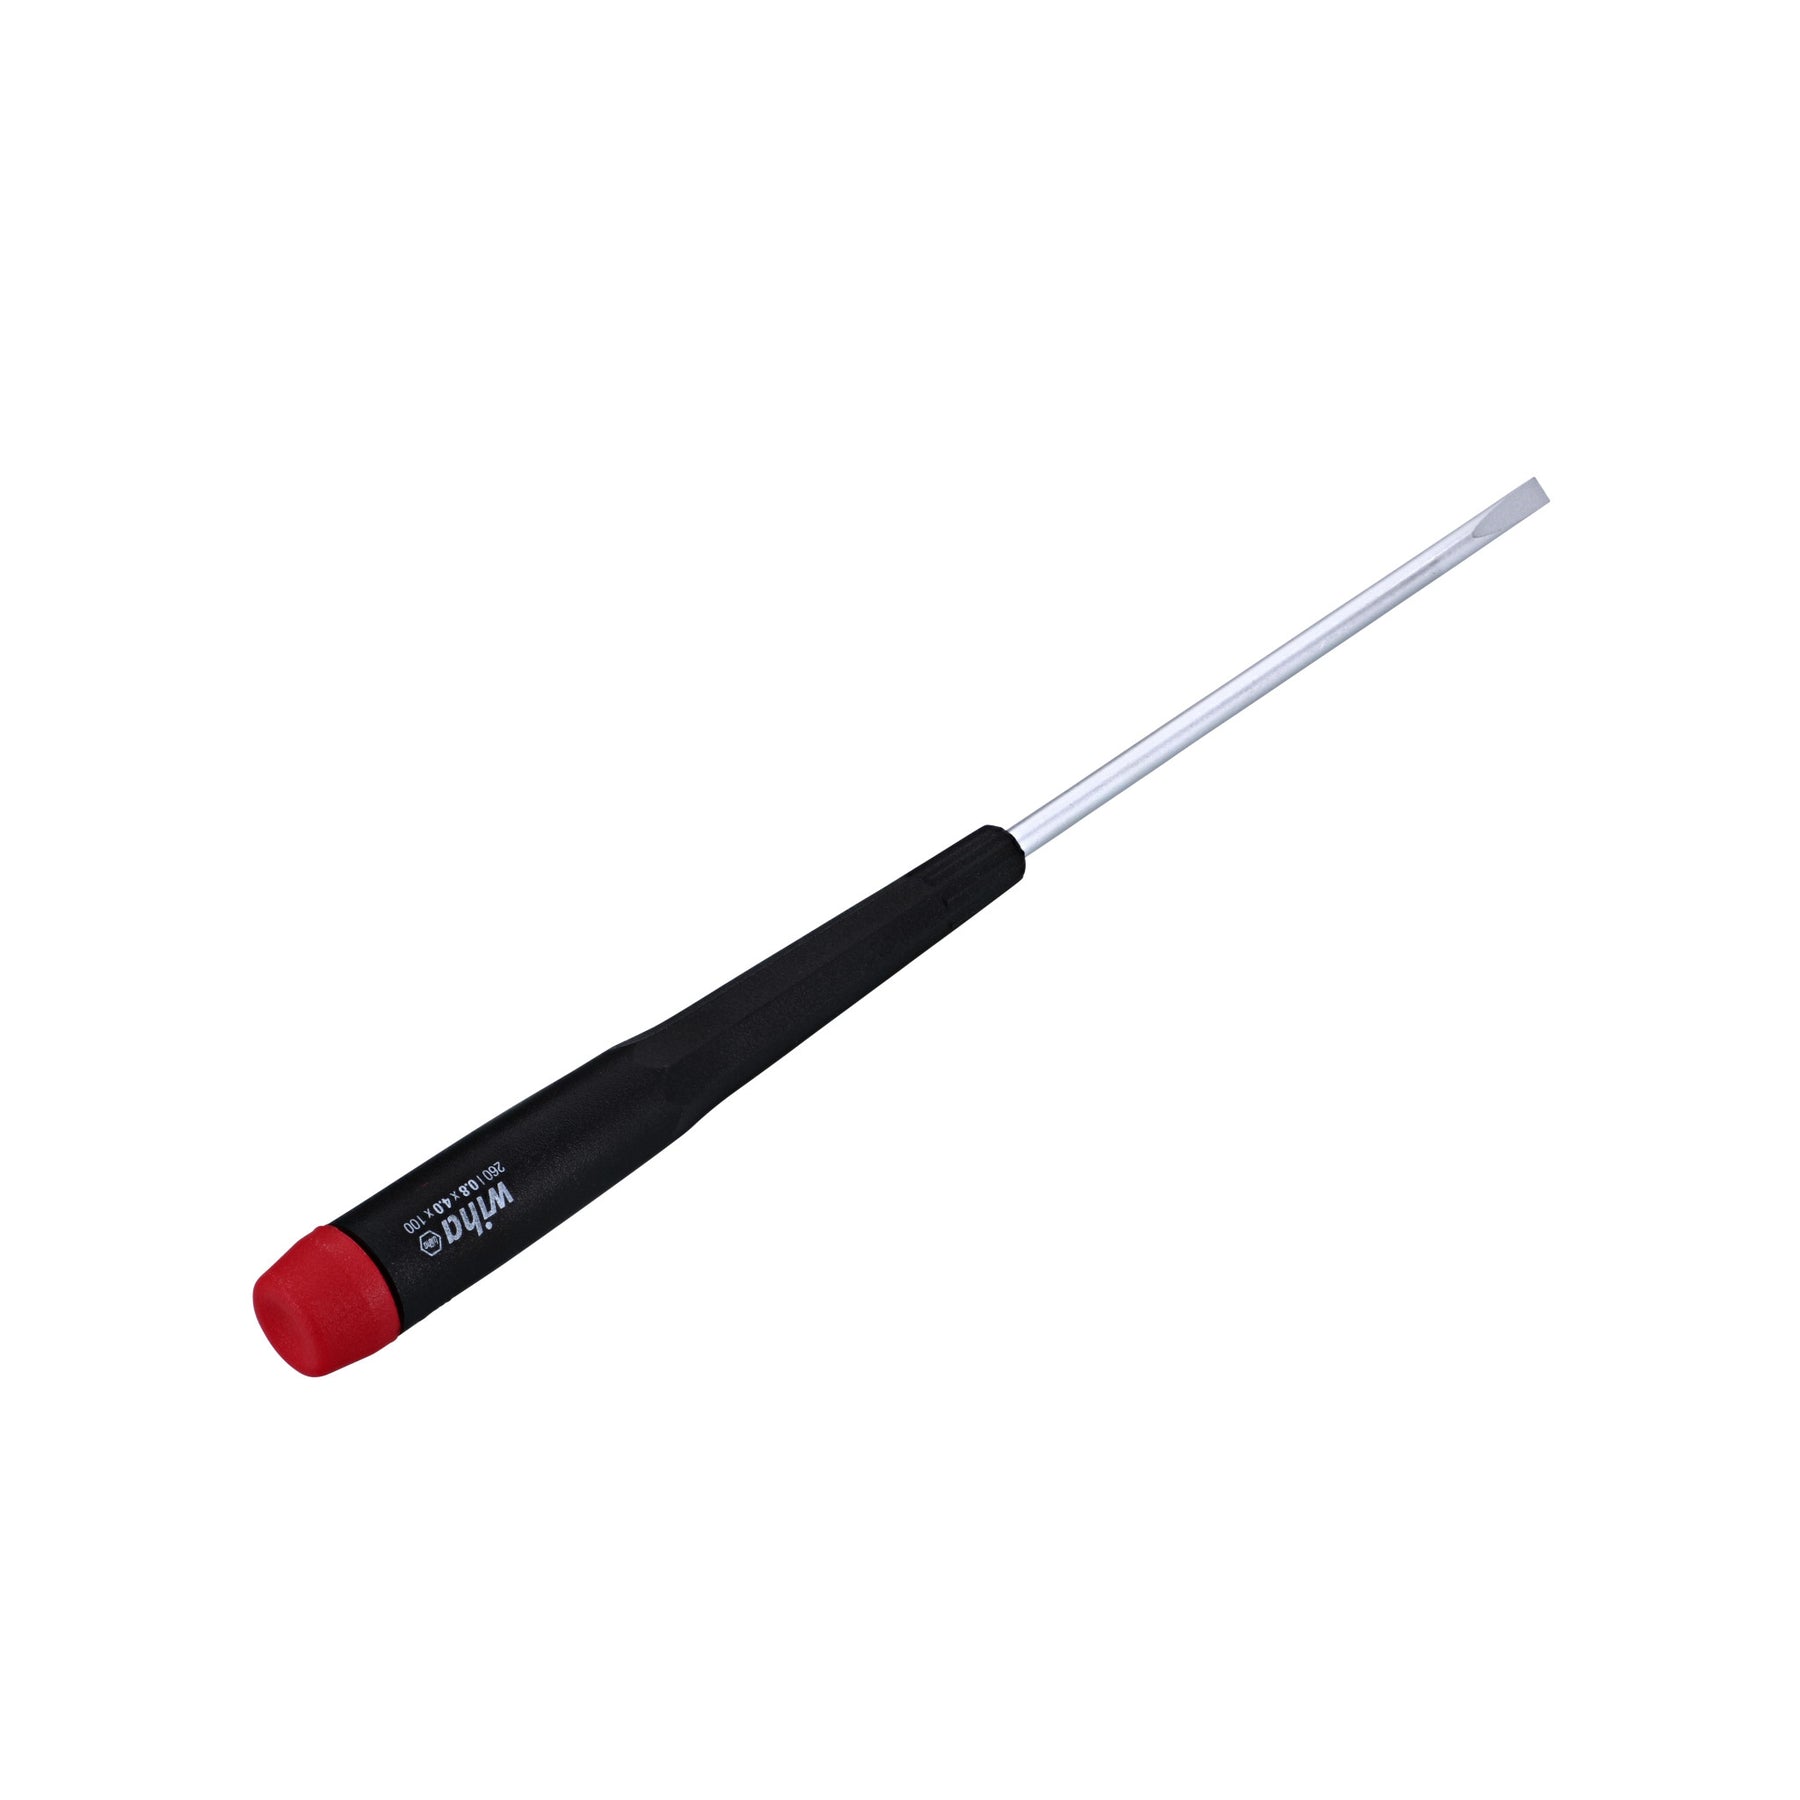 Precision Slotted Screwdriver 4.0mm x 100mm